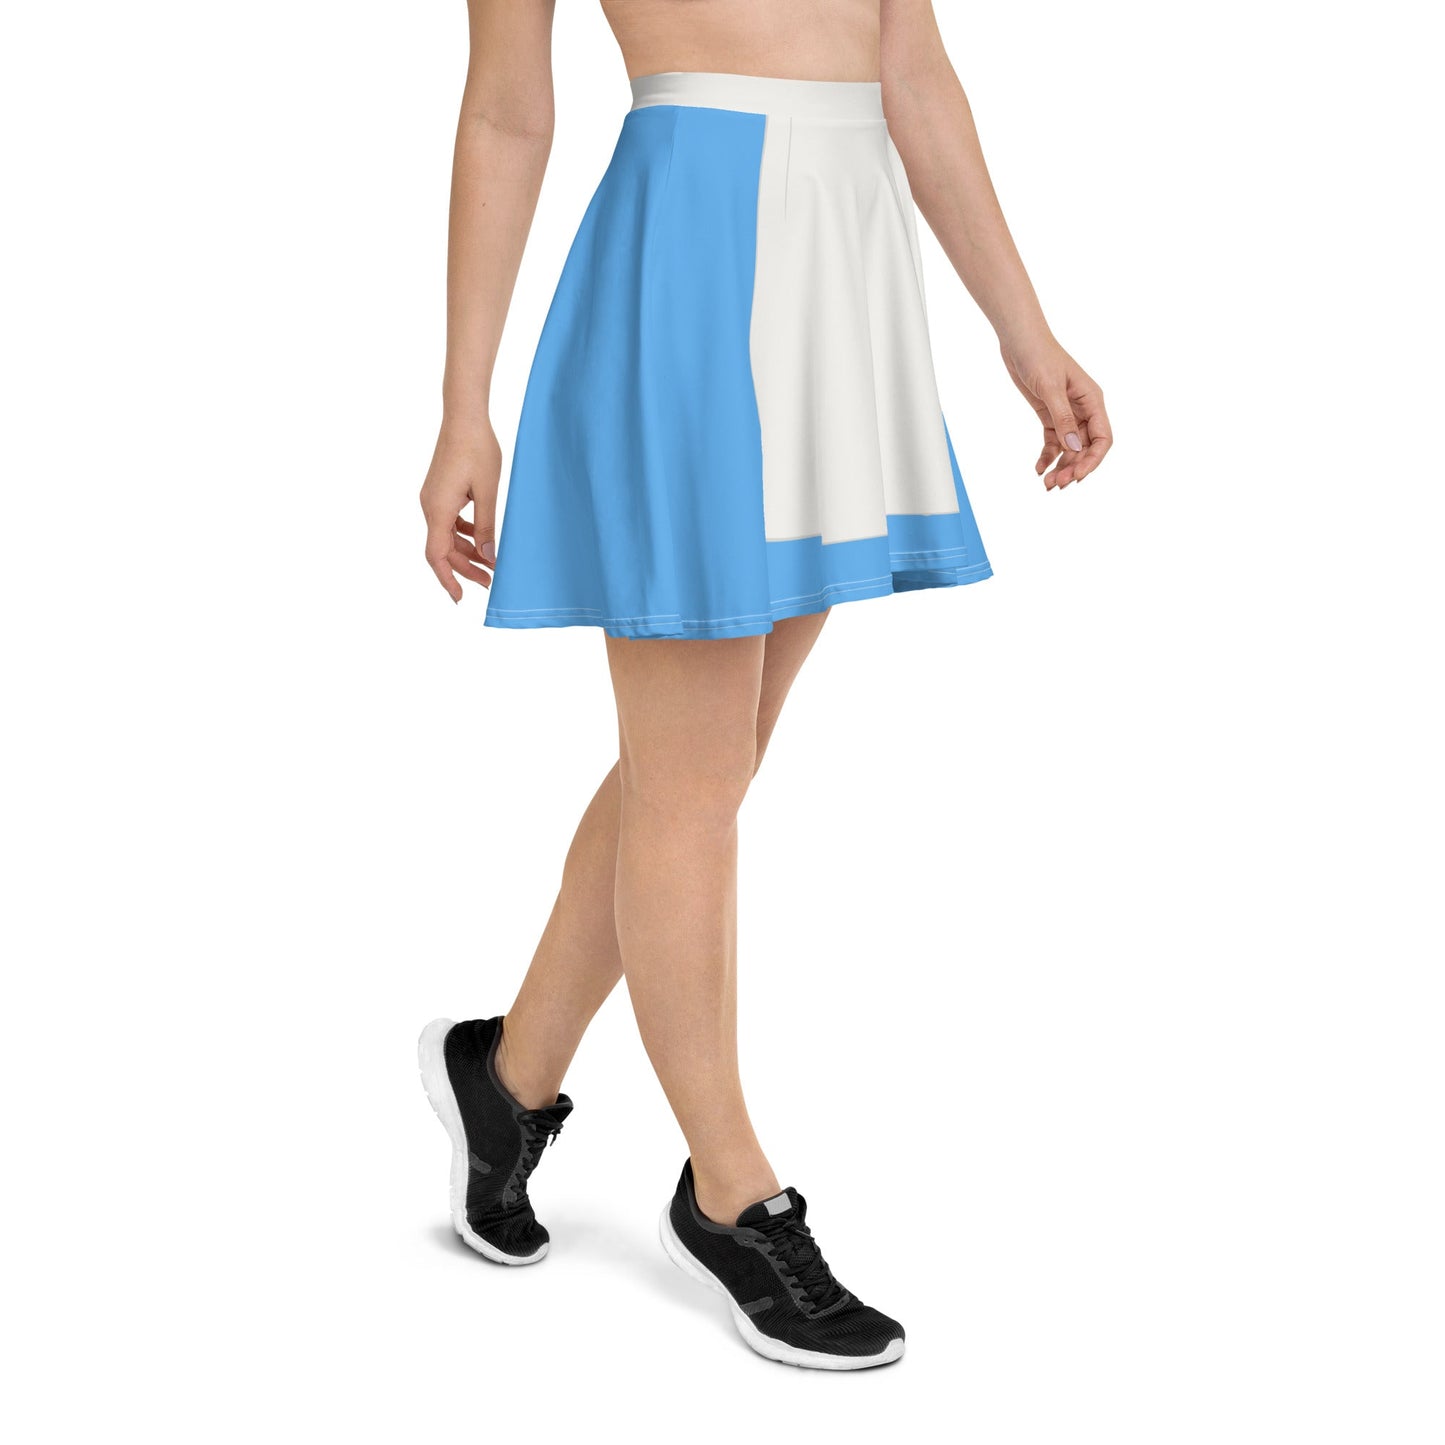 Provincial Girl Skater Skirt Beauty and beastBeauty and the beast dressBeauty belle#tag4##tag5##tag6#